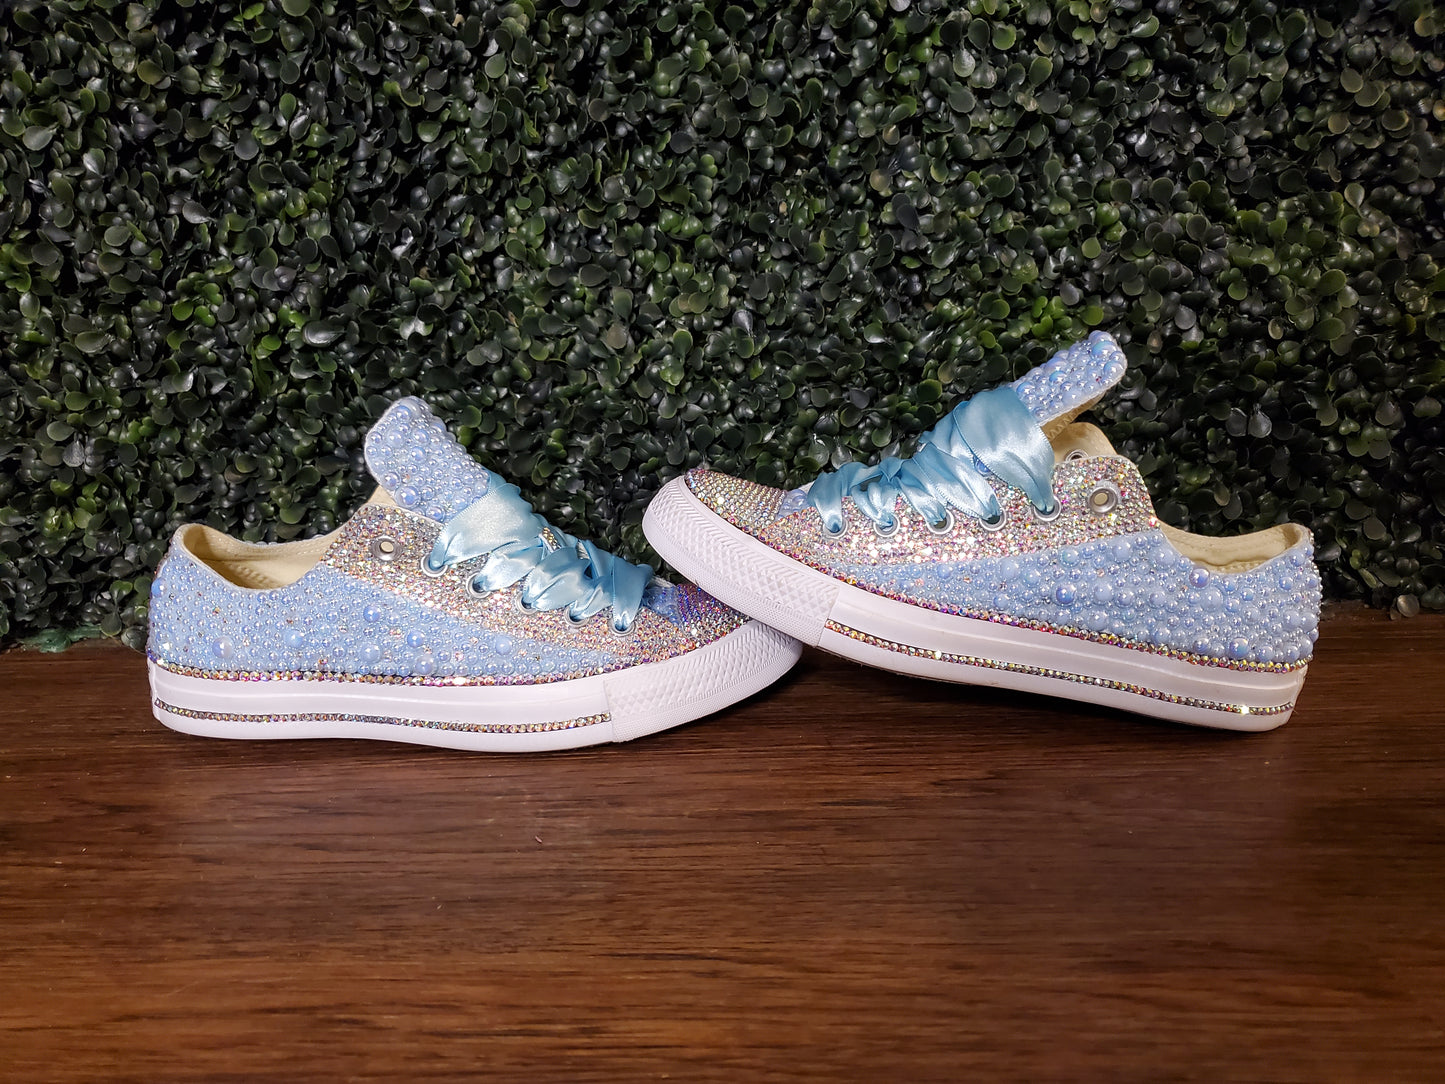 Pearl and Bling Chucks - Low Tops